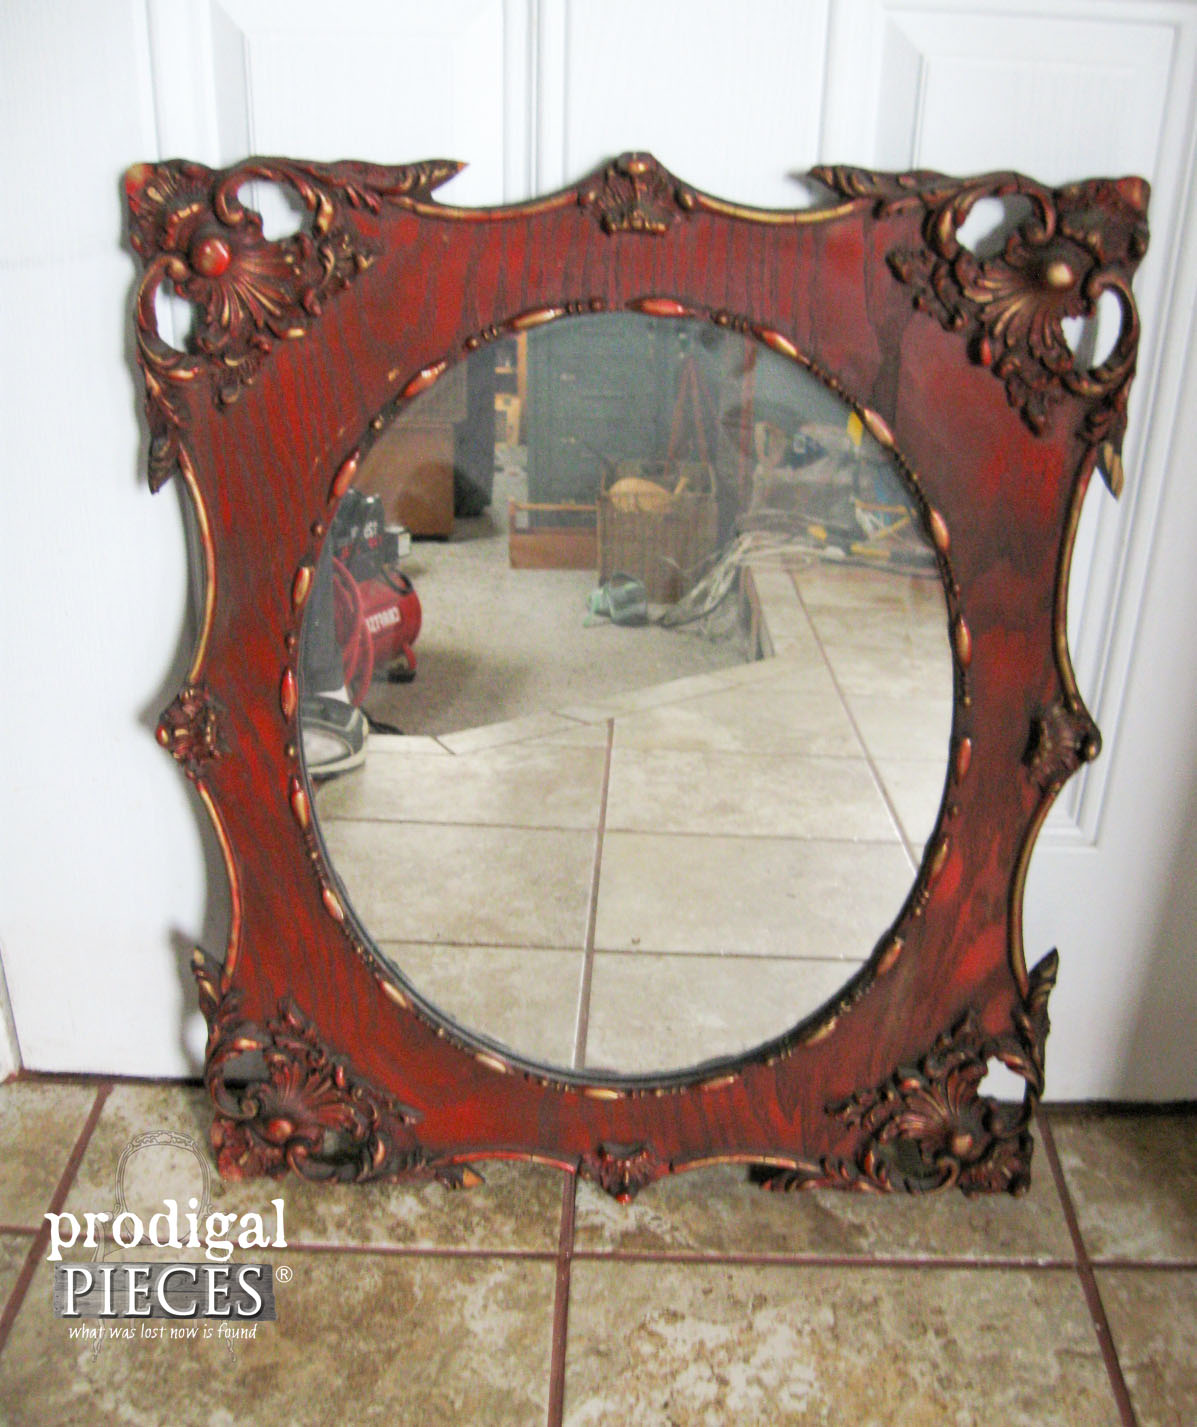 Ornate Vintage Mirror Before Aged Finish | Prodigal Pieces | www.prodigalpieces.com